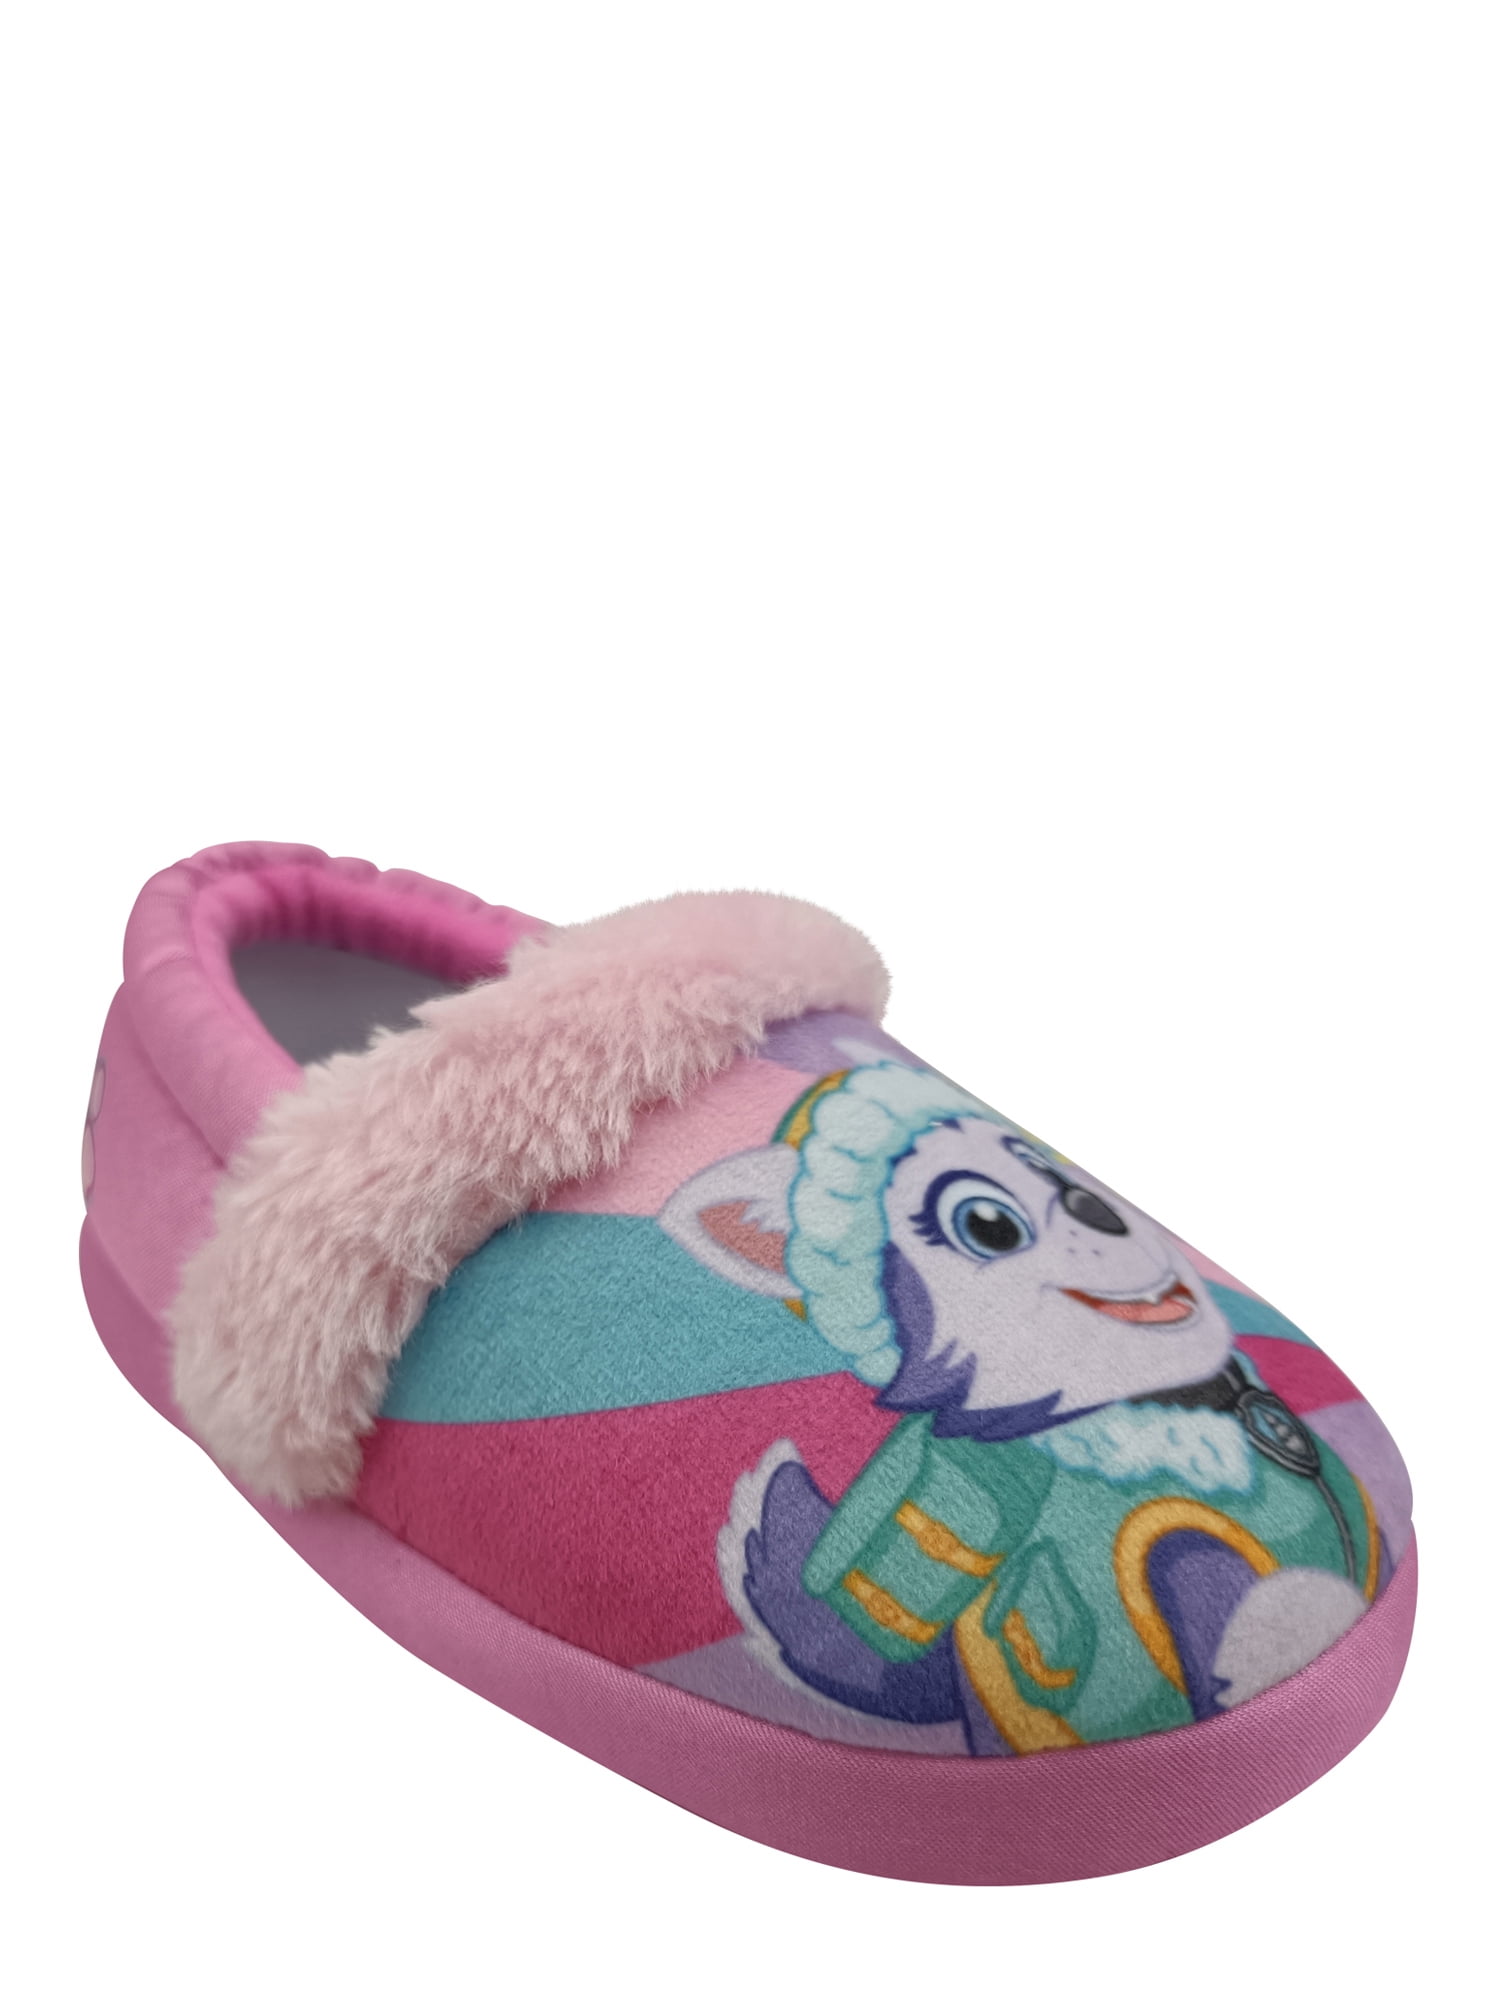 Girls My Little Pony Pony Pal Slippers Shoes Aqua/Pink Toddler Childrens Size UK 6-12